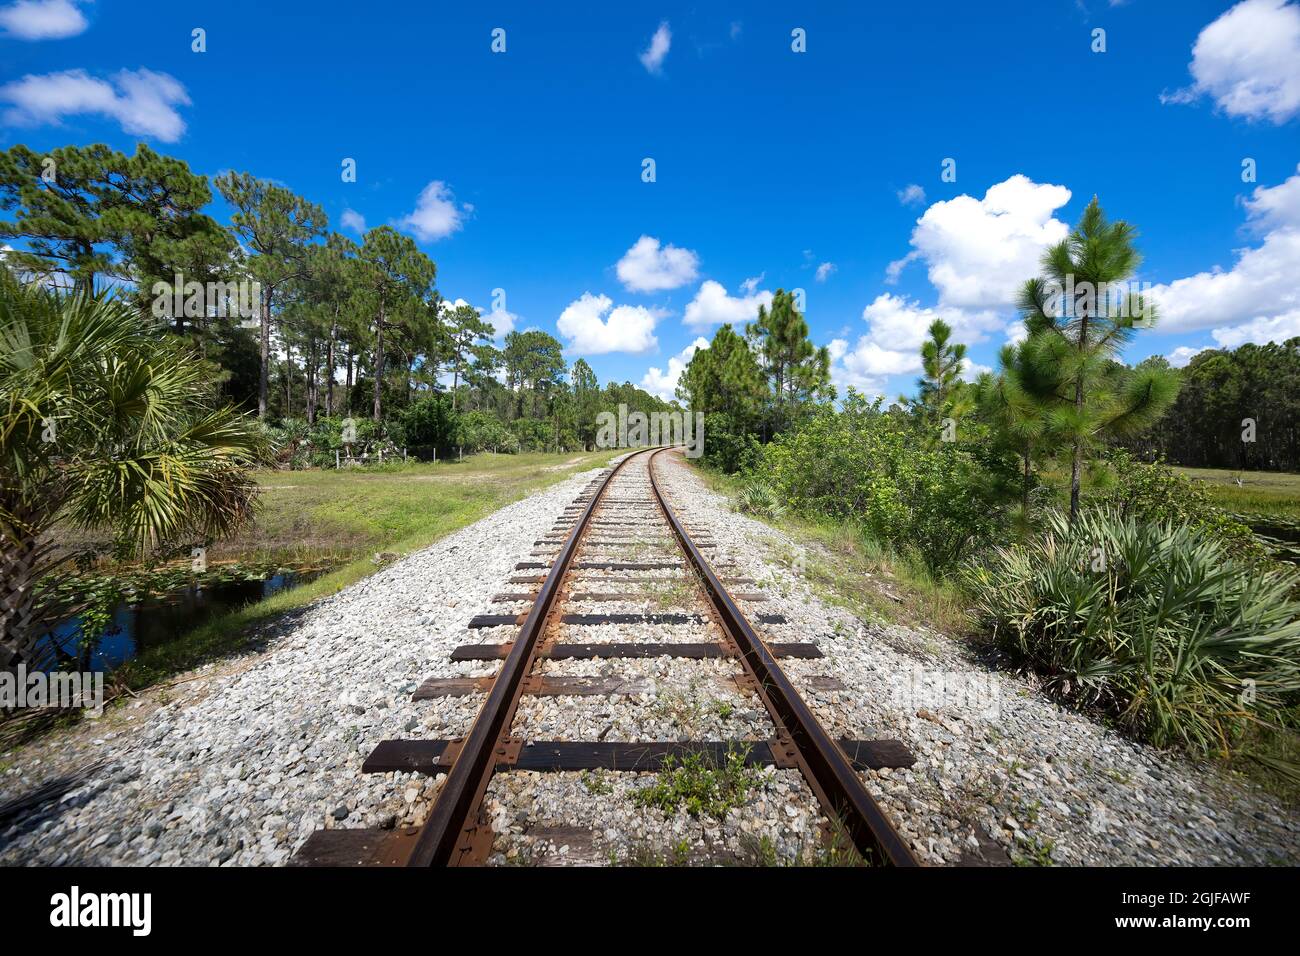 Railroad tracks lead off into the distance before disappearing behind trees in a rural area of Central Florida. Stock Photo